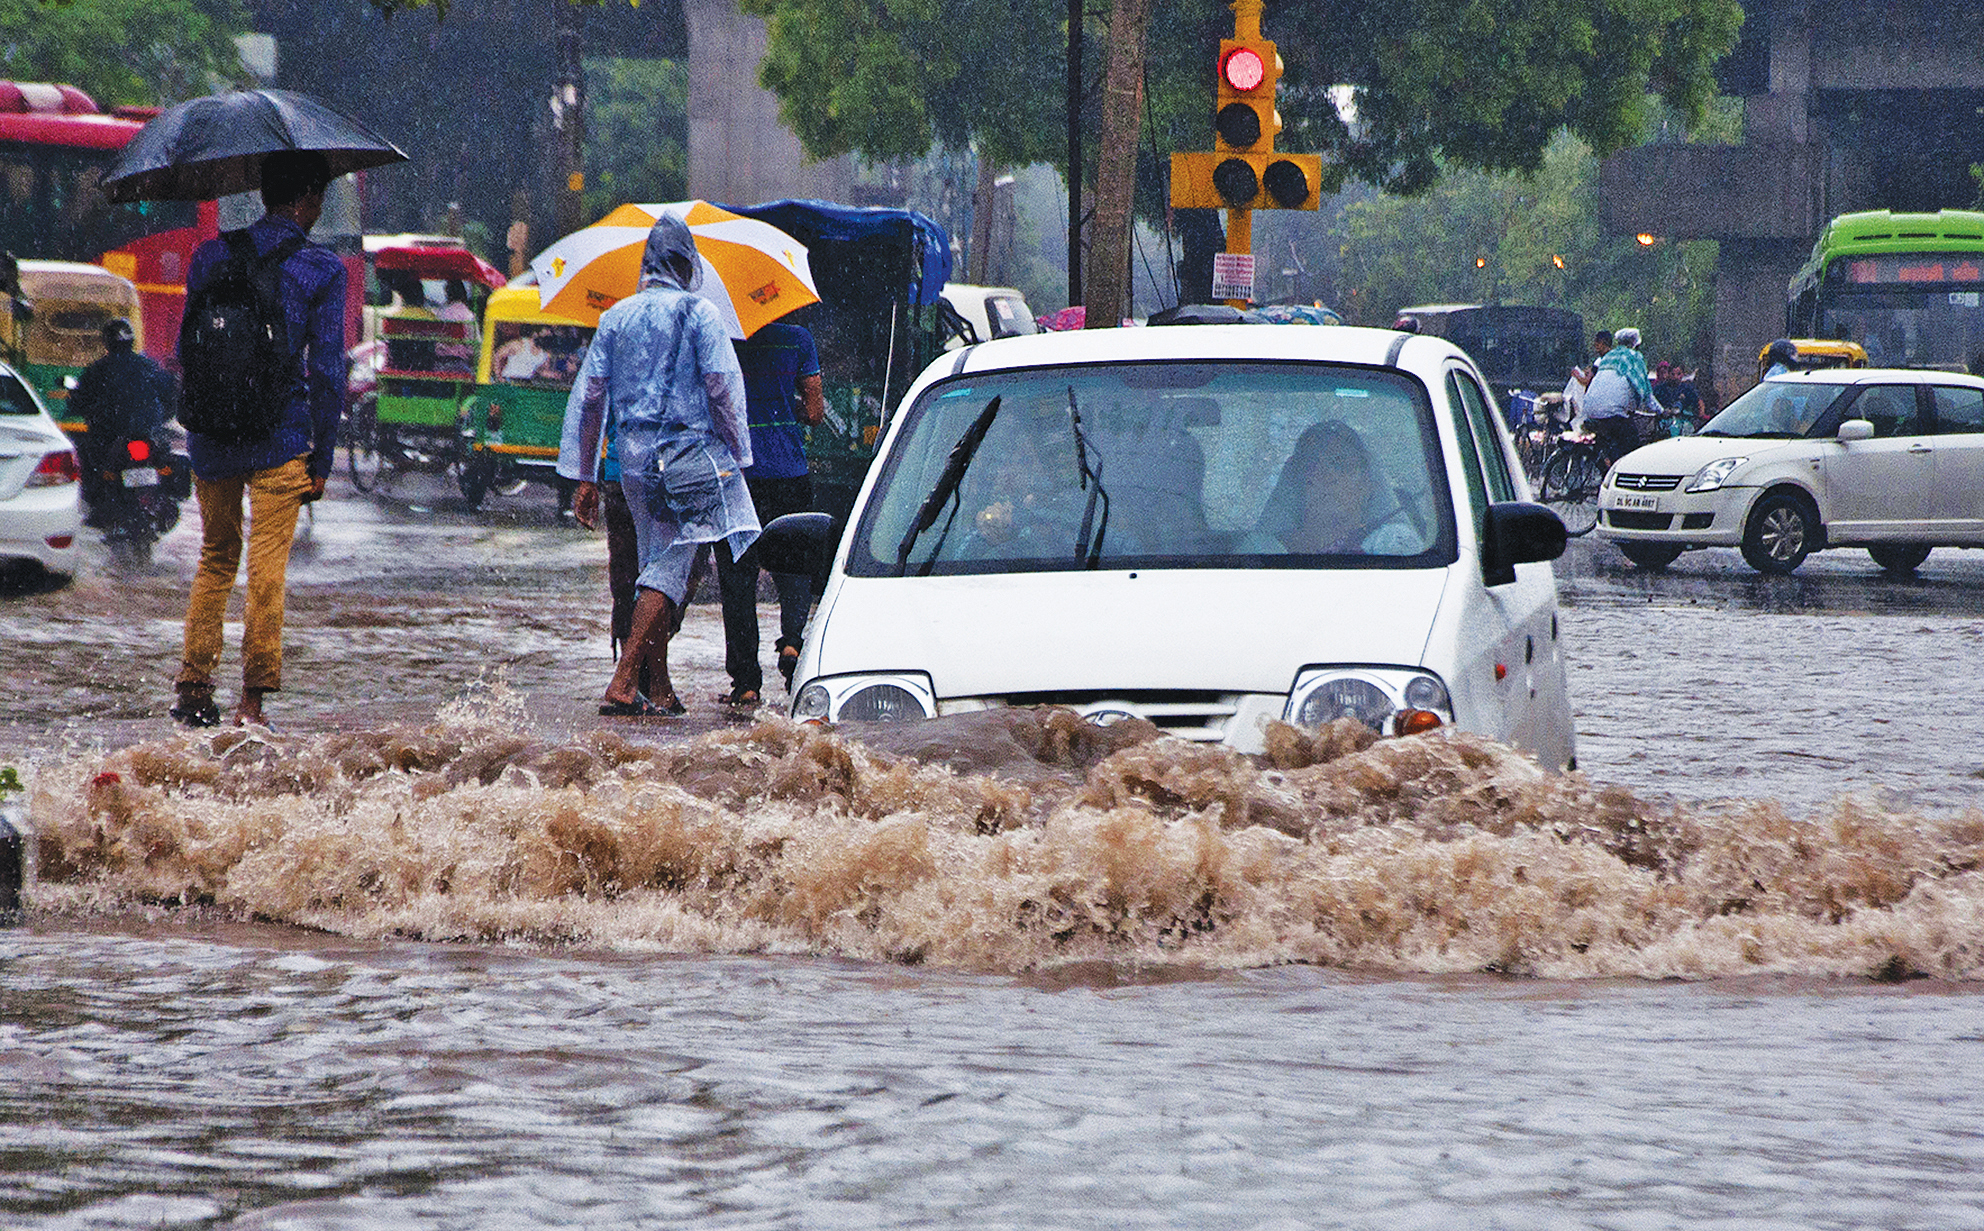 As Yamuna continues to swell in Delhi, schools shut in areas inundated with flood